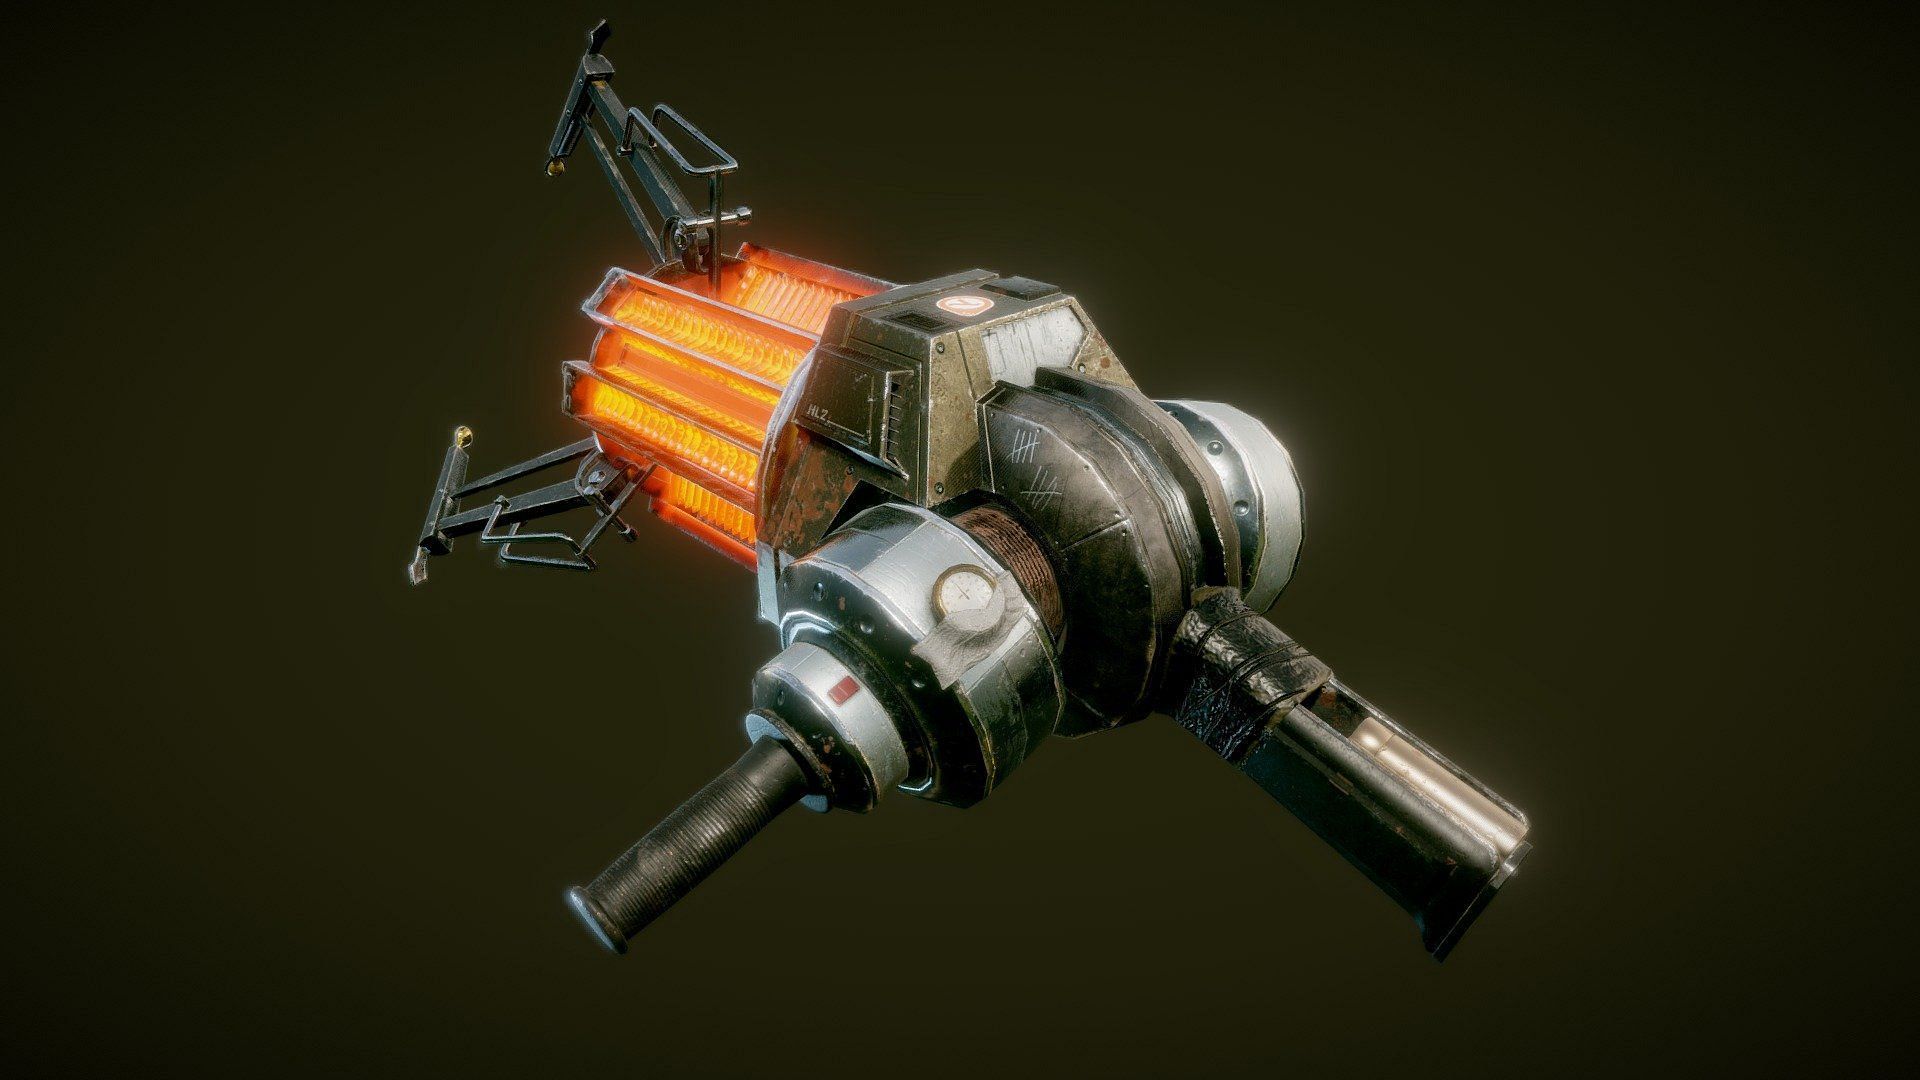 The Gravity Gun in Half-life 2 is one of the most iconic guns of all time (Image via Valve)